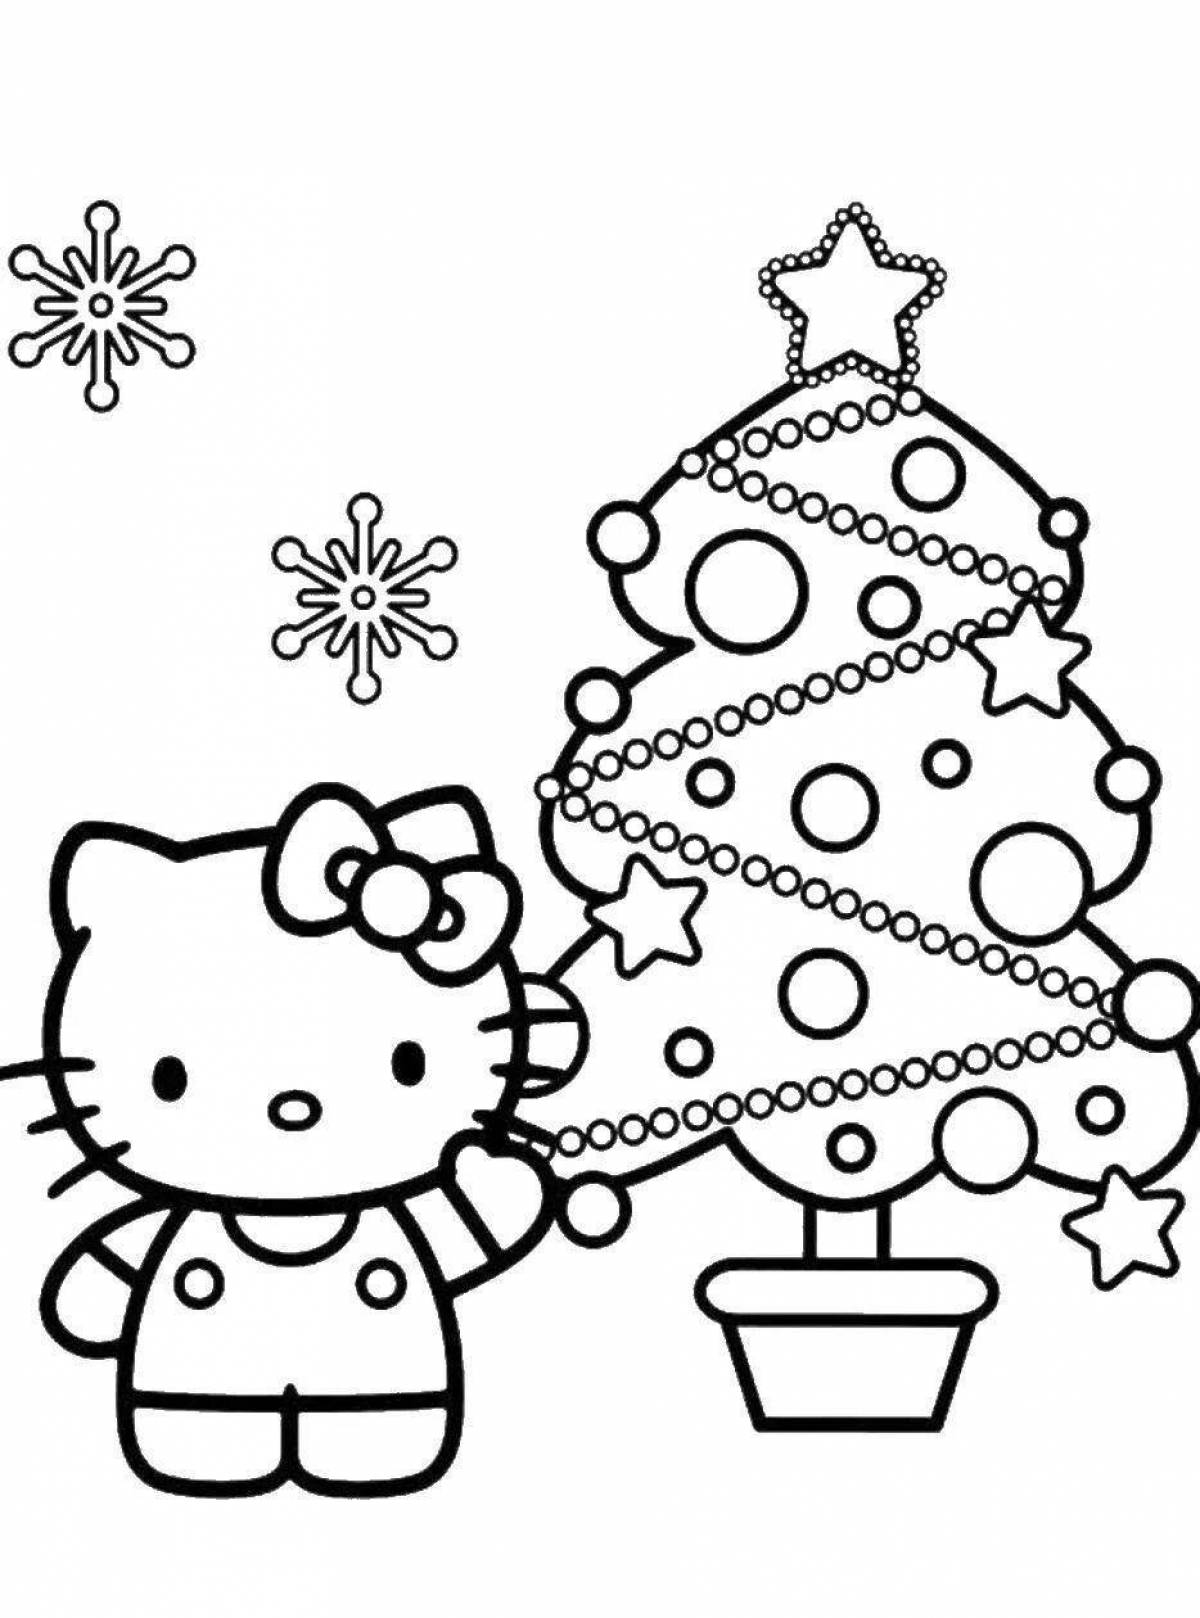 Merry Christmas coloring book for girls 6 years old